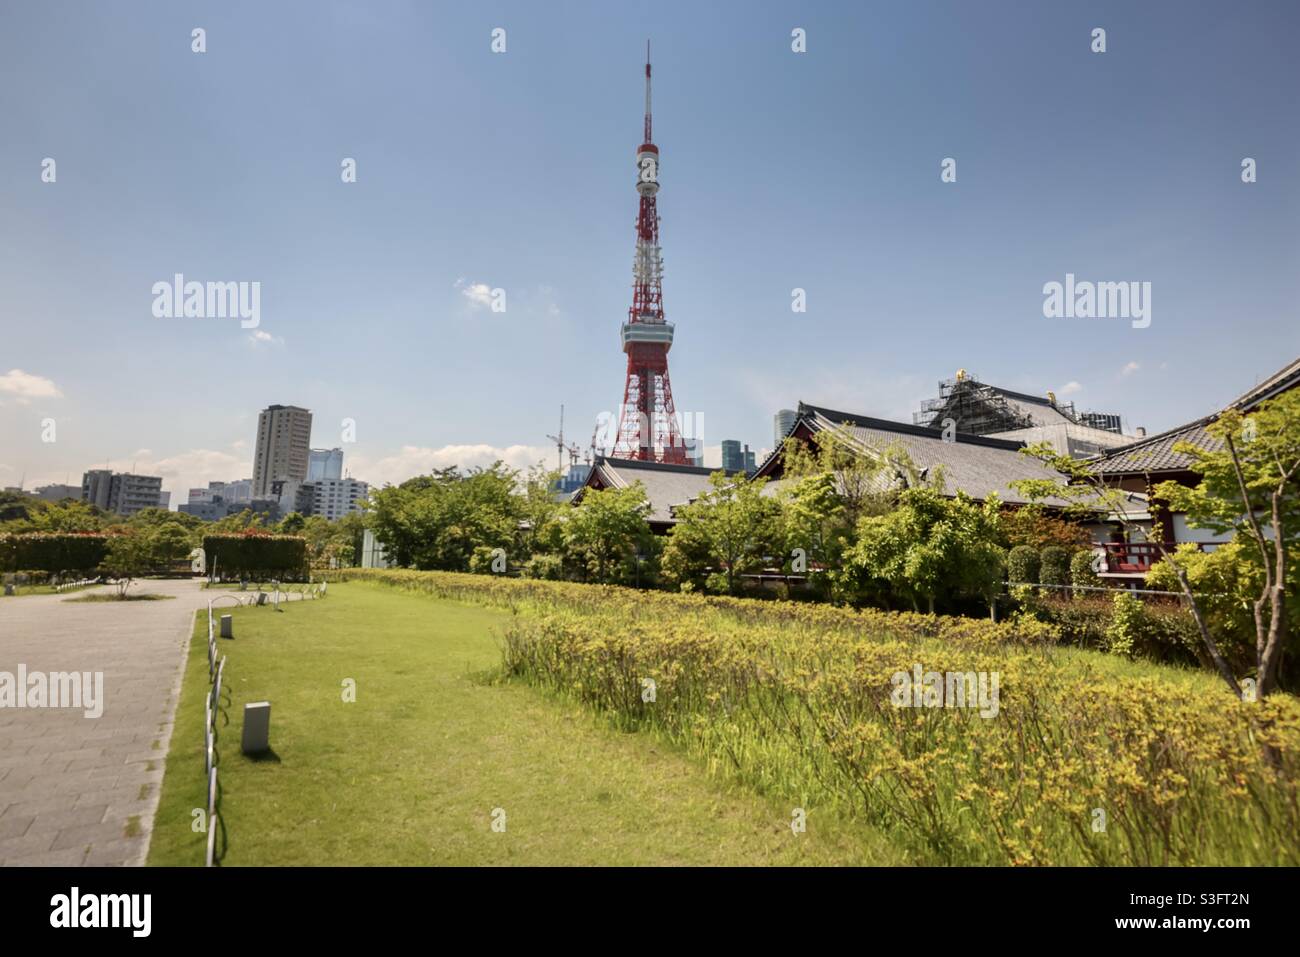 Tokyo Tower is located in 4 Chome 2-8, Shiba Park in Minato Ward, Tokyo, Japan, 2nd tallest Tower in Japan, measuring height 332.9 meters. It's near Zozoji Temple. Stock Photo